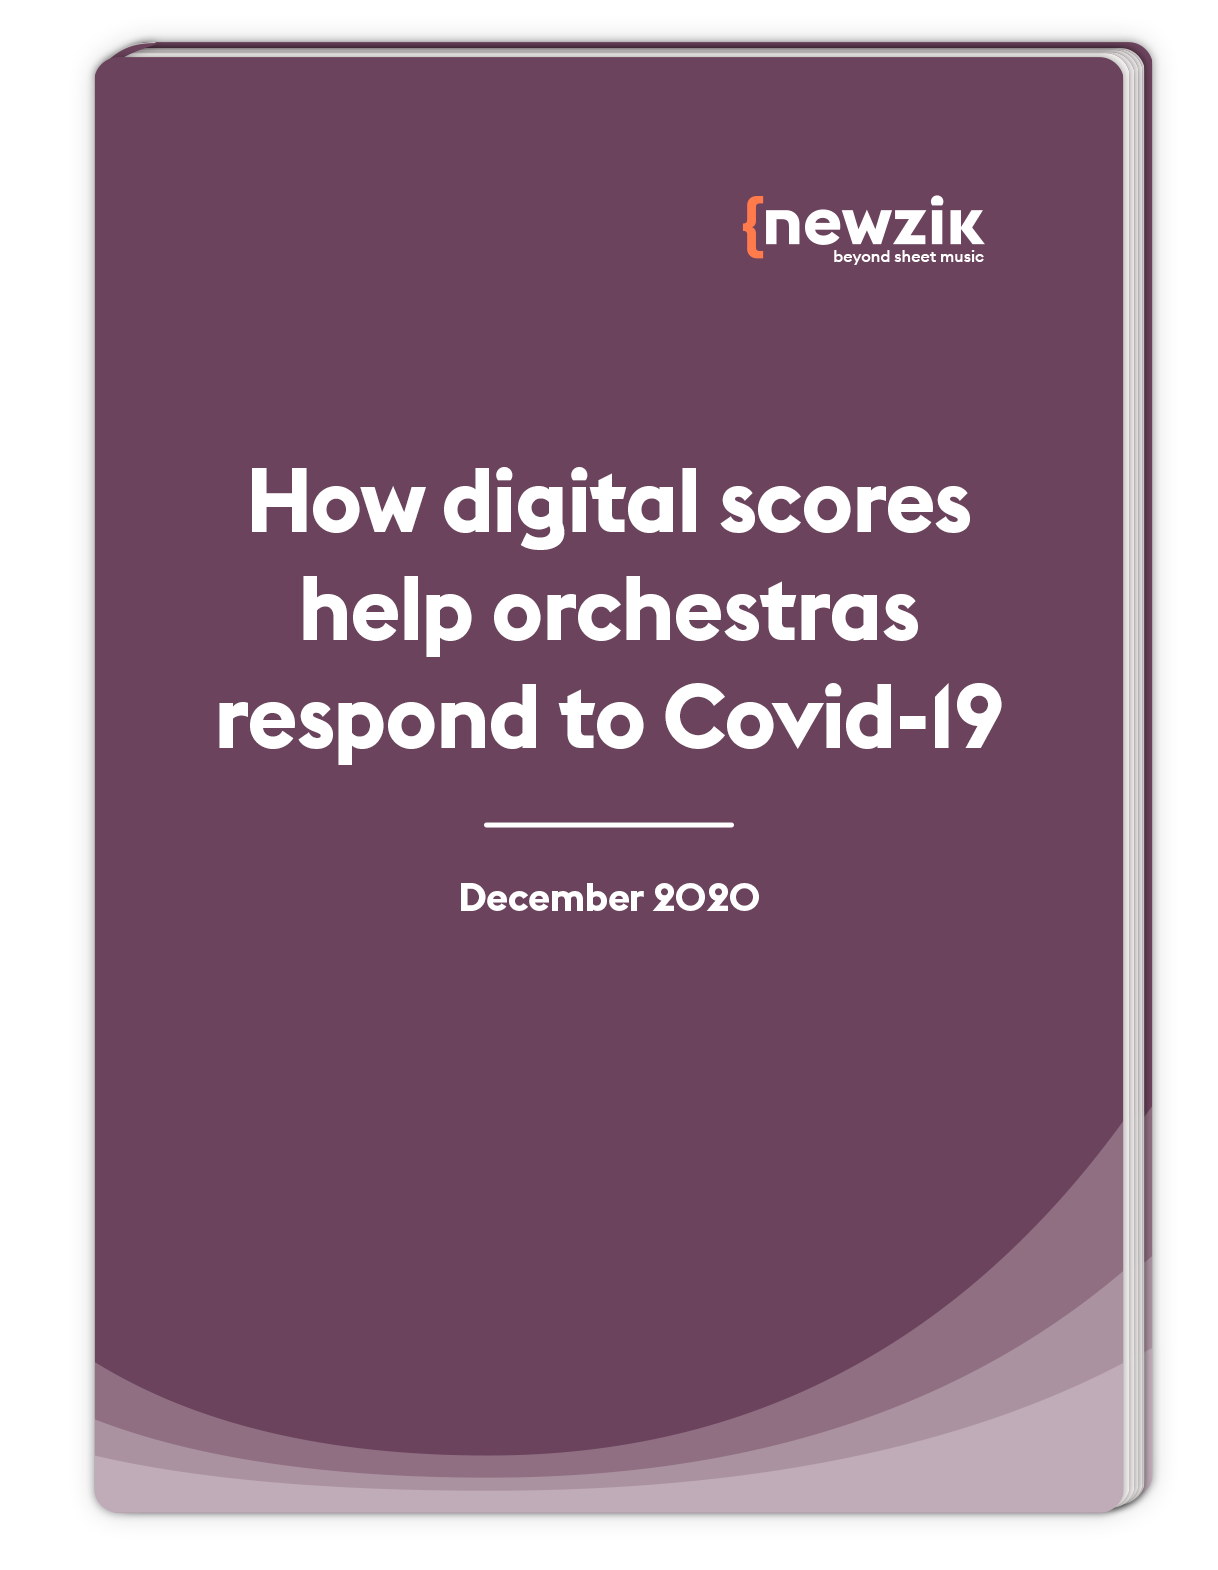 How digital scores help orchestras respond to Covid-19